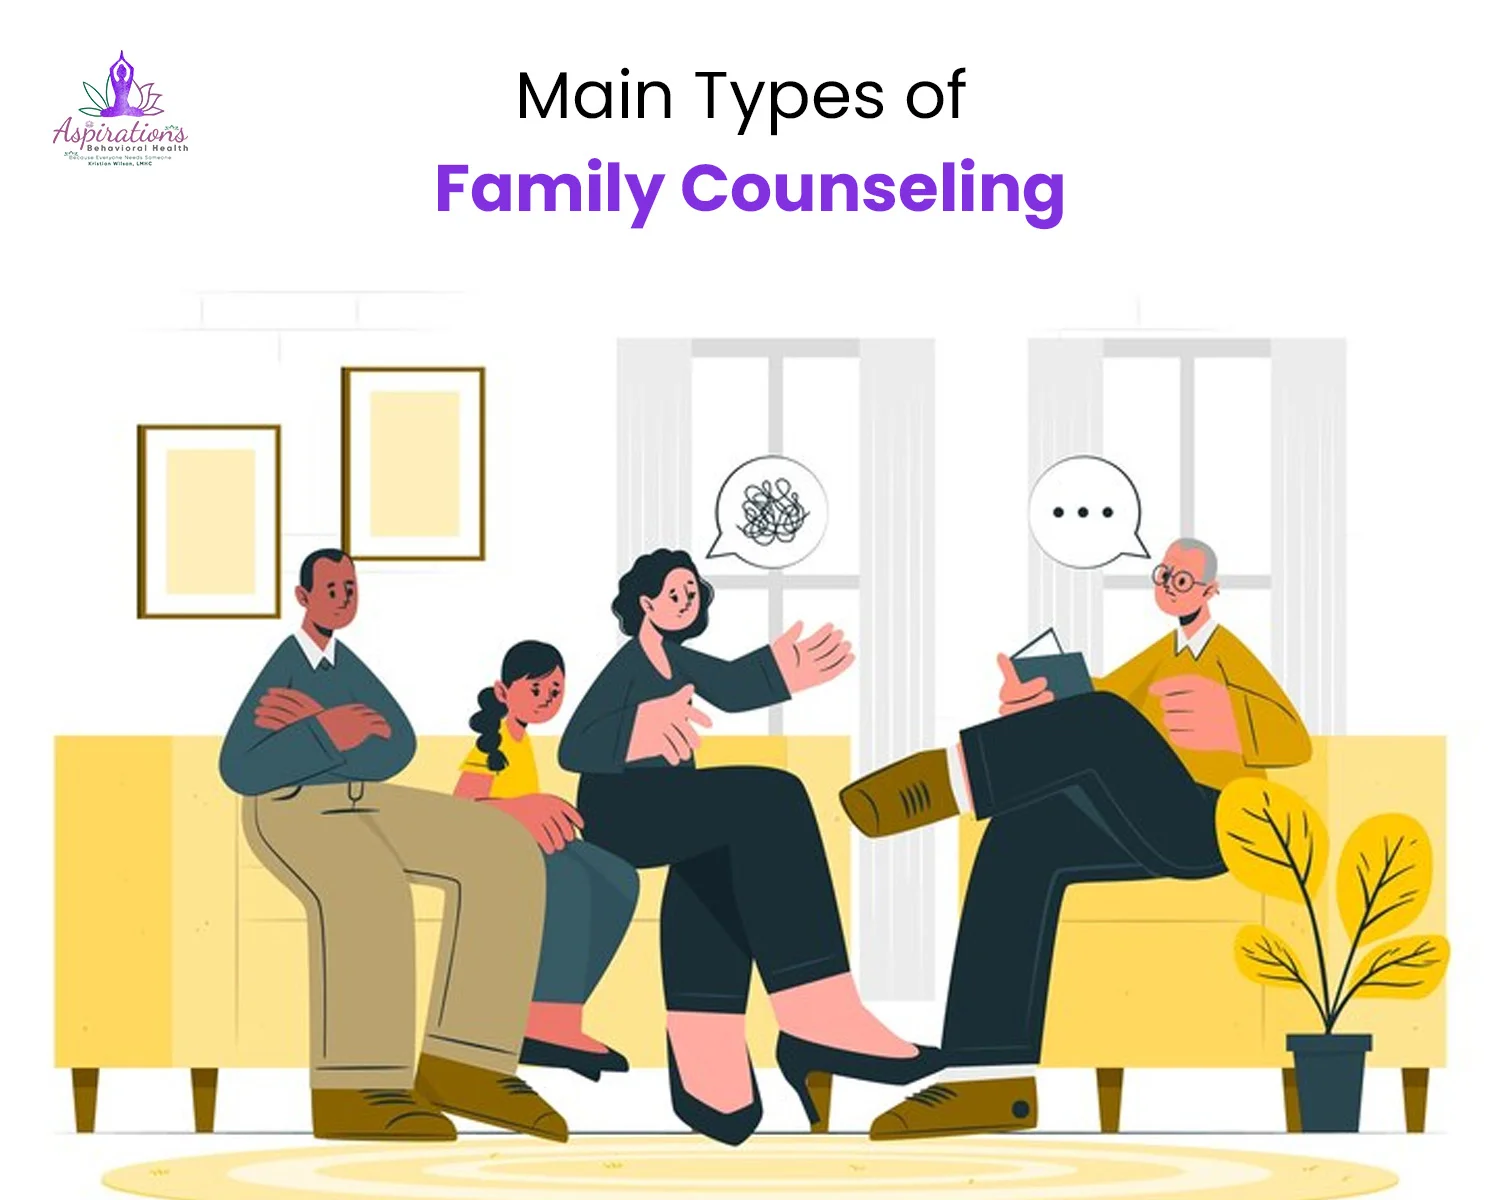 Main Types of Family Counseling